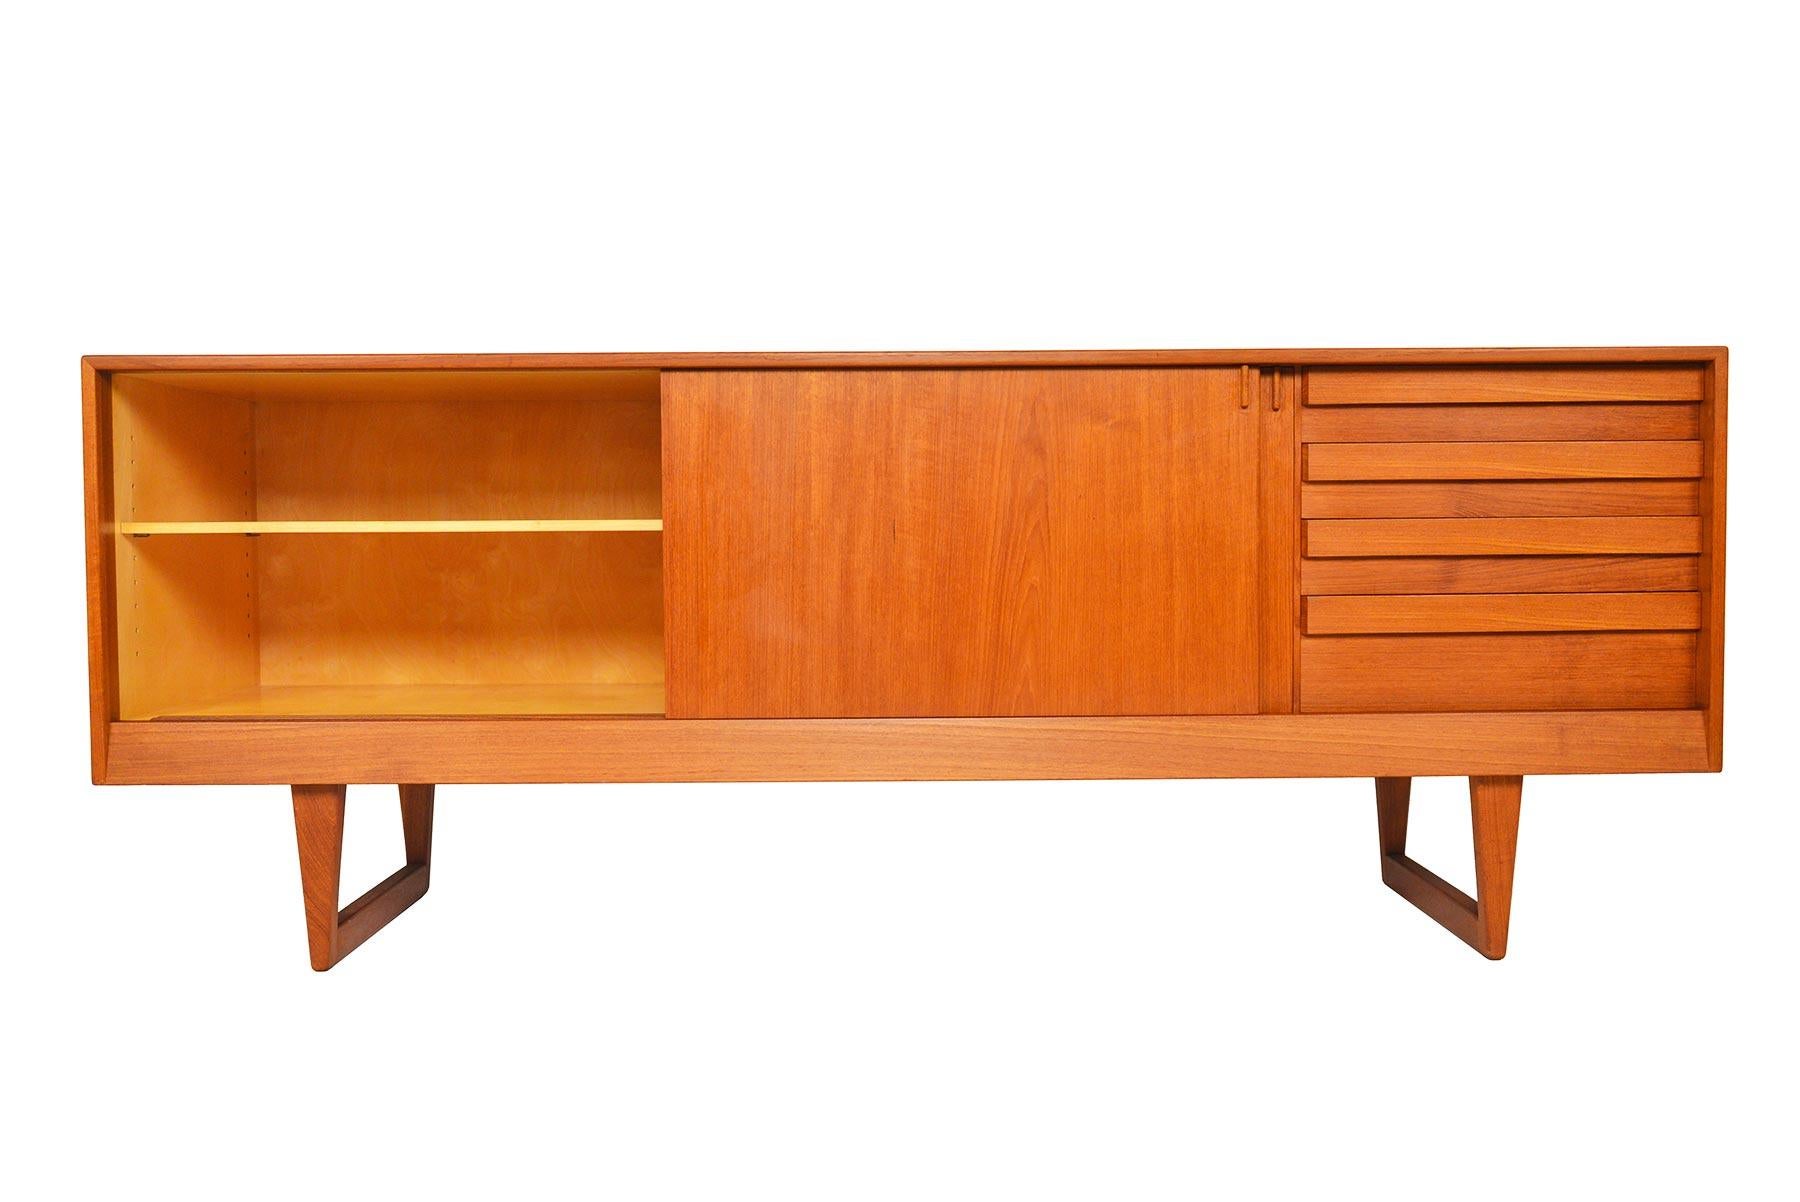 Taking angular design to the next level, this Danish modern credenza by Kurt Østervig for KP Møbler is a modern marvel. Two large sliding doors open to reveal three bays with adjustable shelving. A bank of four drawers with rectangular pulls are